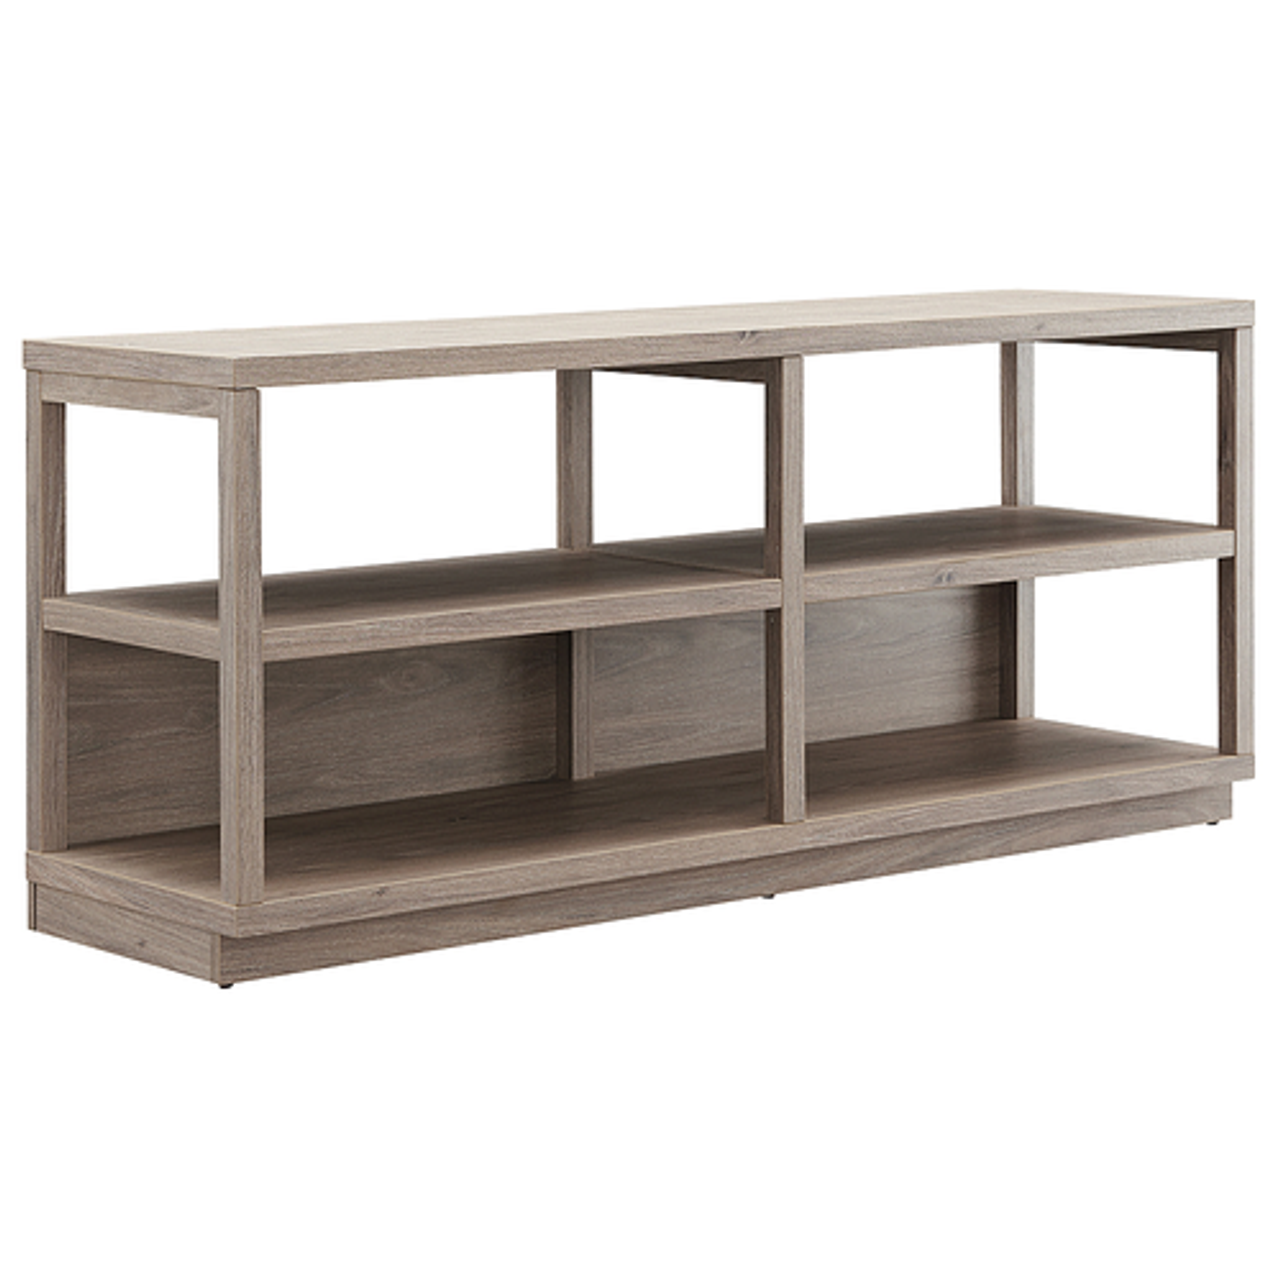 Camden&Wells - Thalia TV Stand for TVs up to 60" - Antiqued Gray Oak